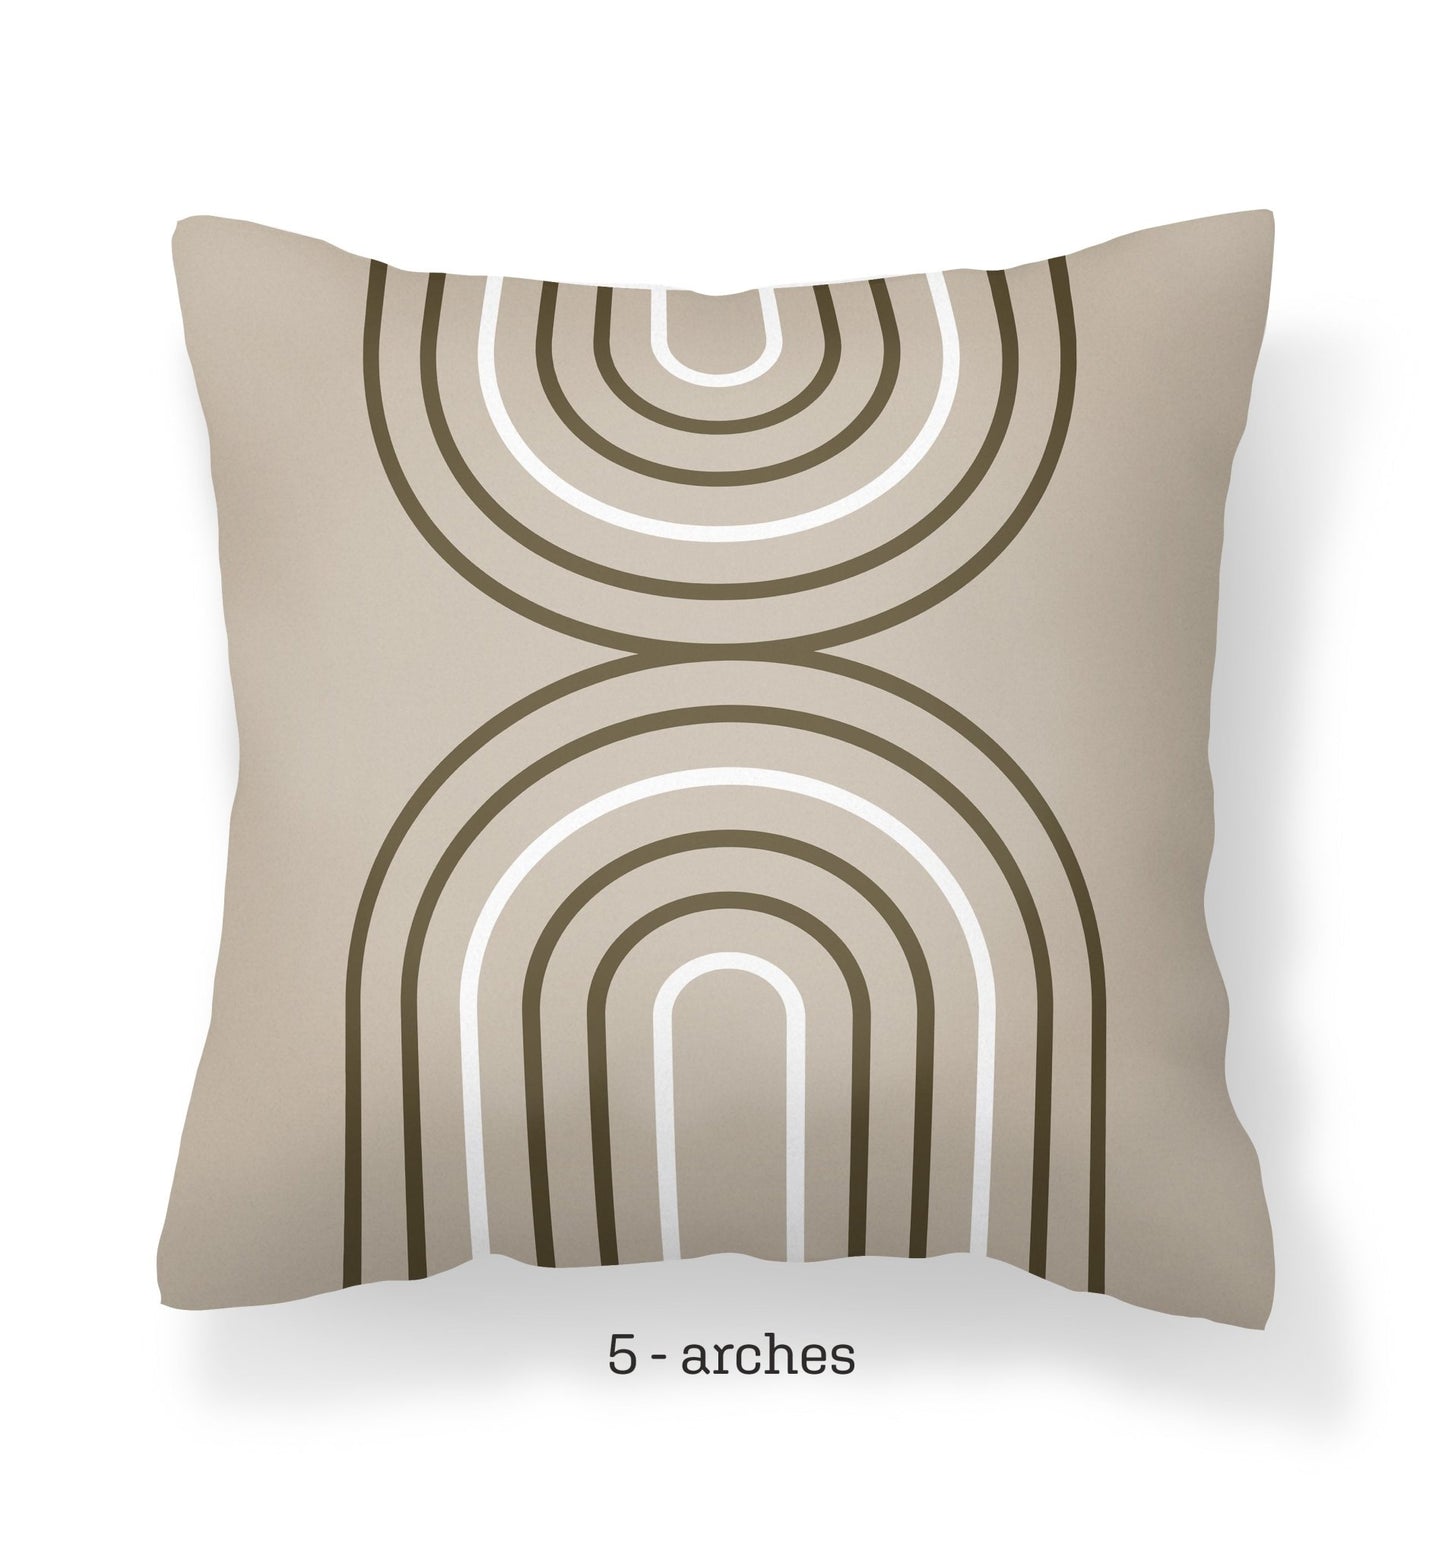 Boho Throw Pillow Covers - Mix and Match